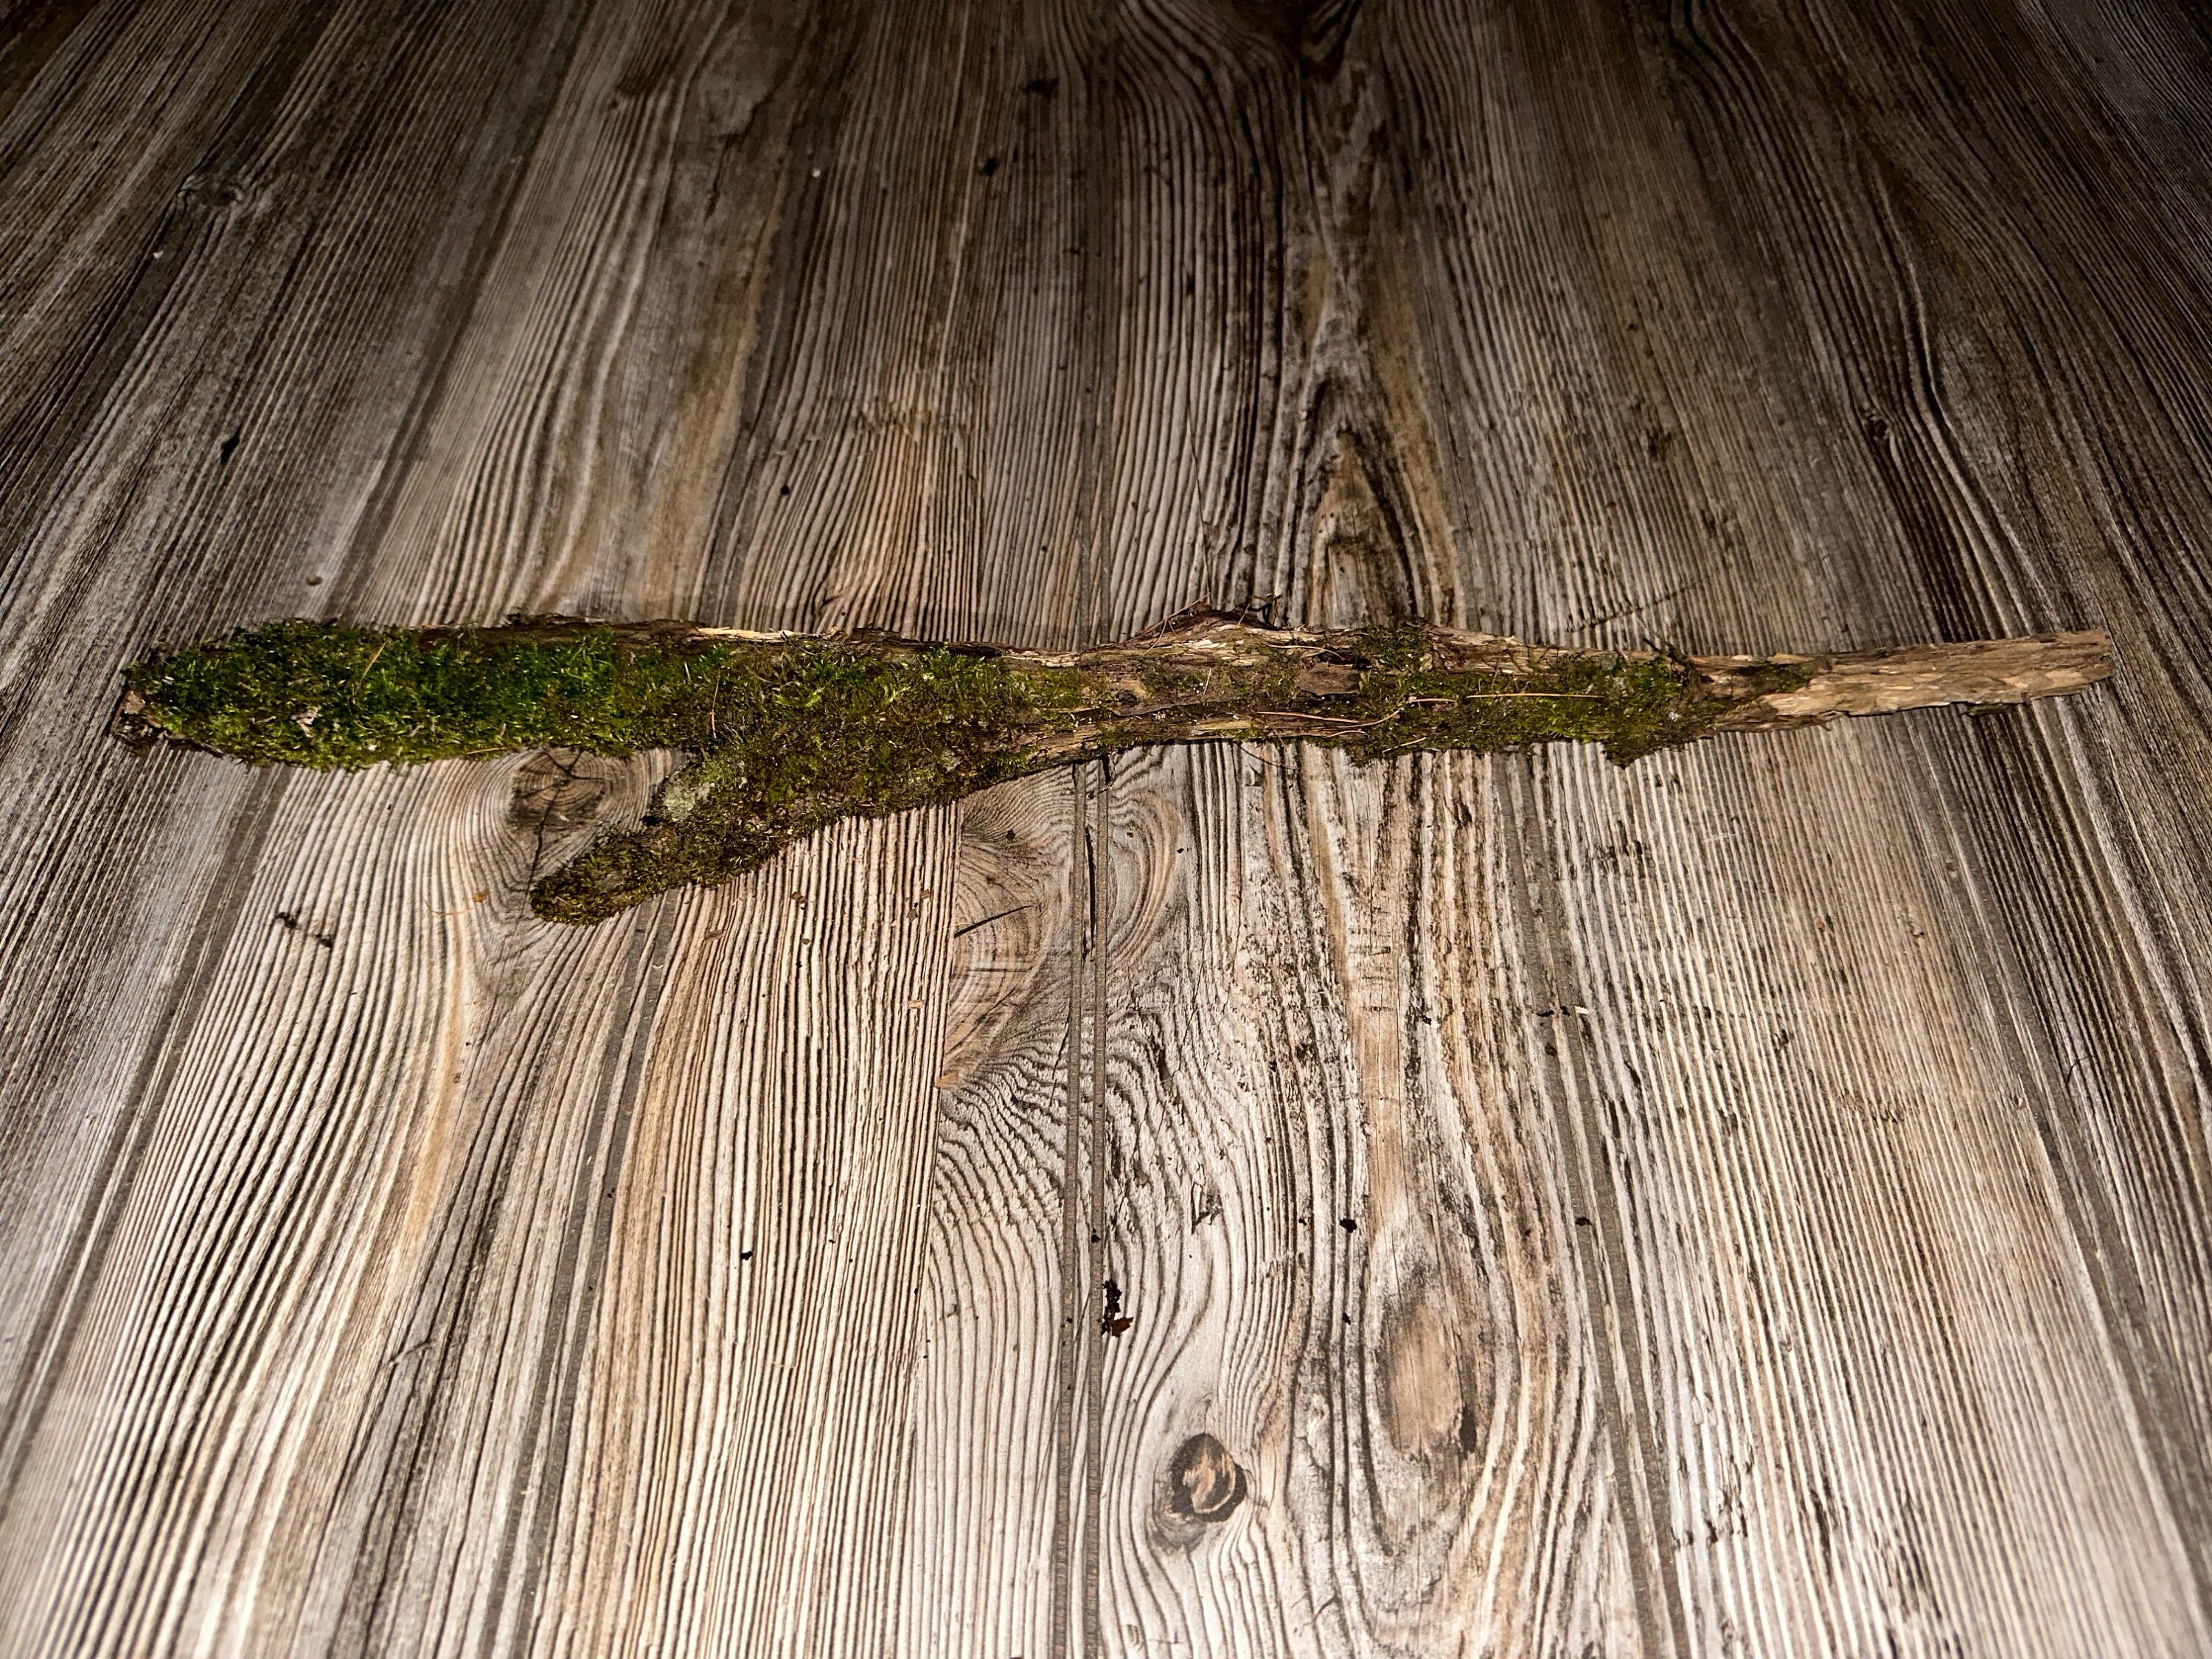 Moss Covered Log, Mossy Log, 19 Inches Long by 3 Inches Wide and 1 Inch High